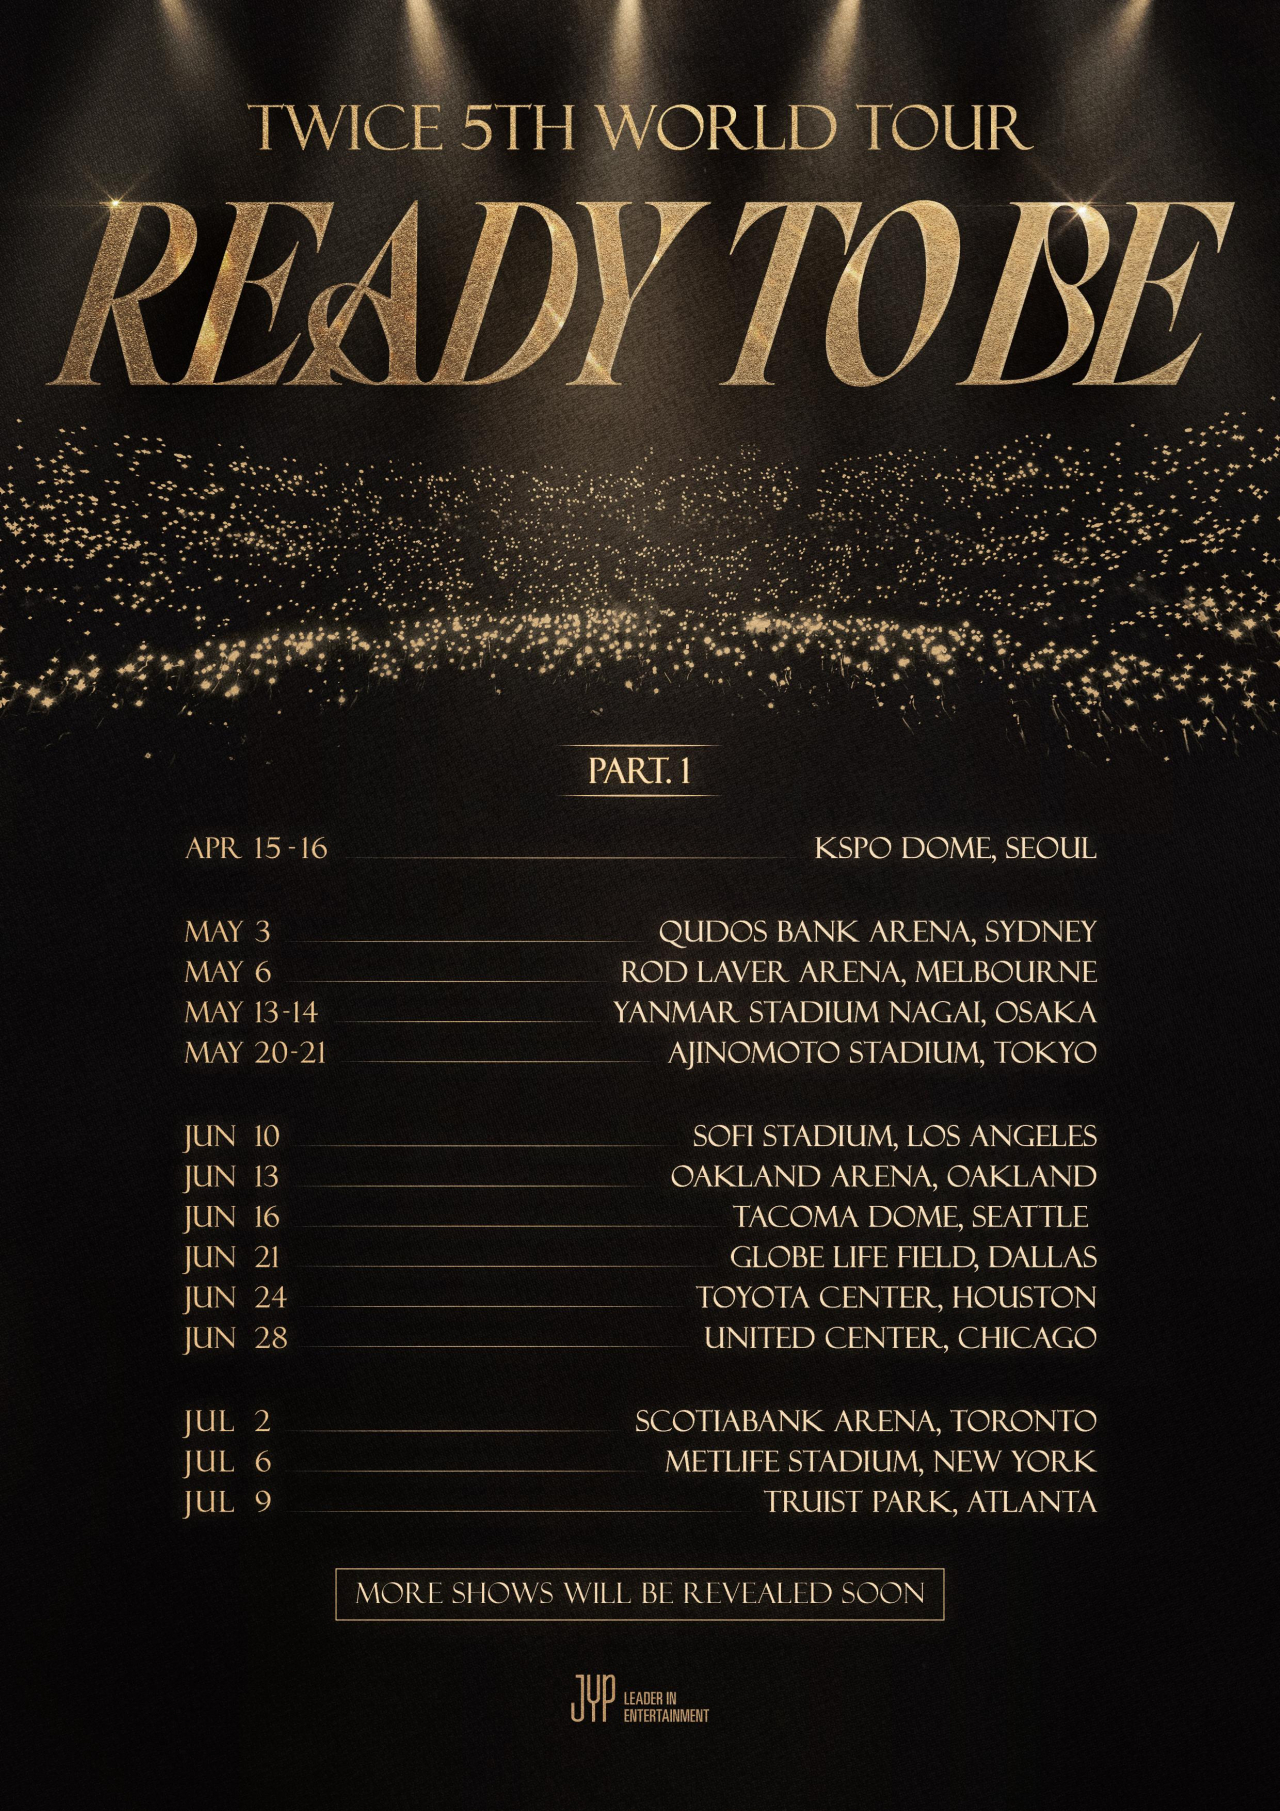 Schedule poster of Twice's 5th world tour